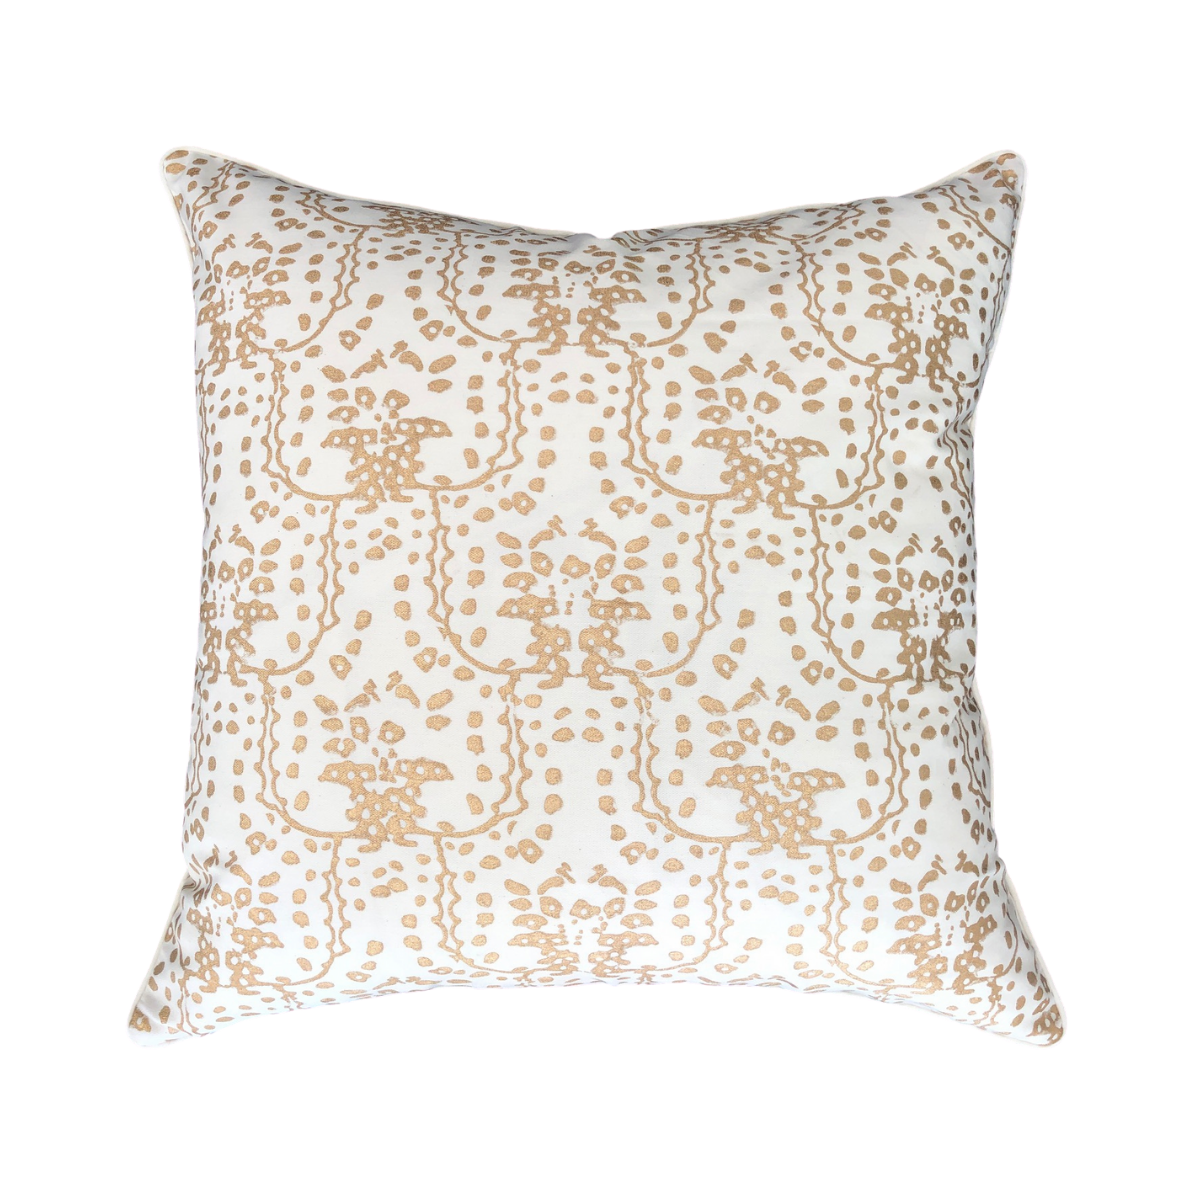 Kiska Textiles Kowloon Pillow Cover in Gold Leaf